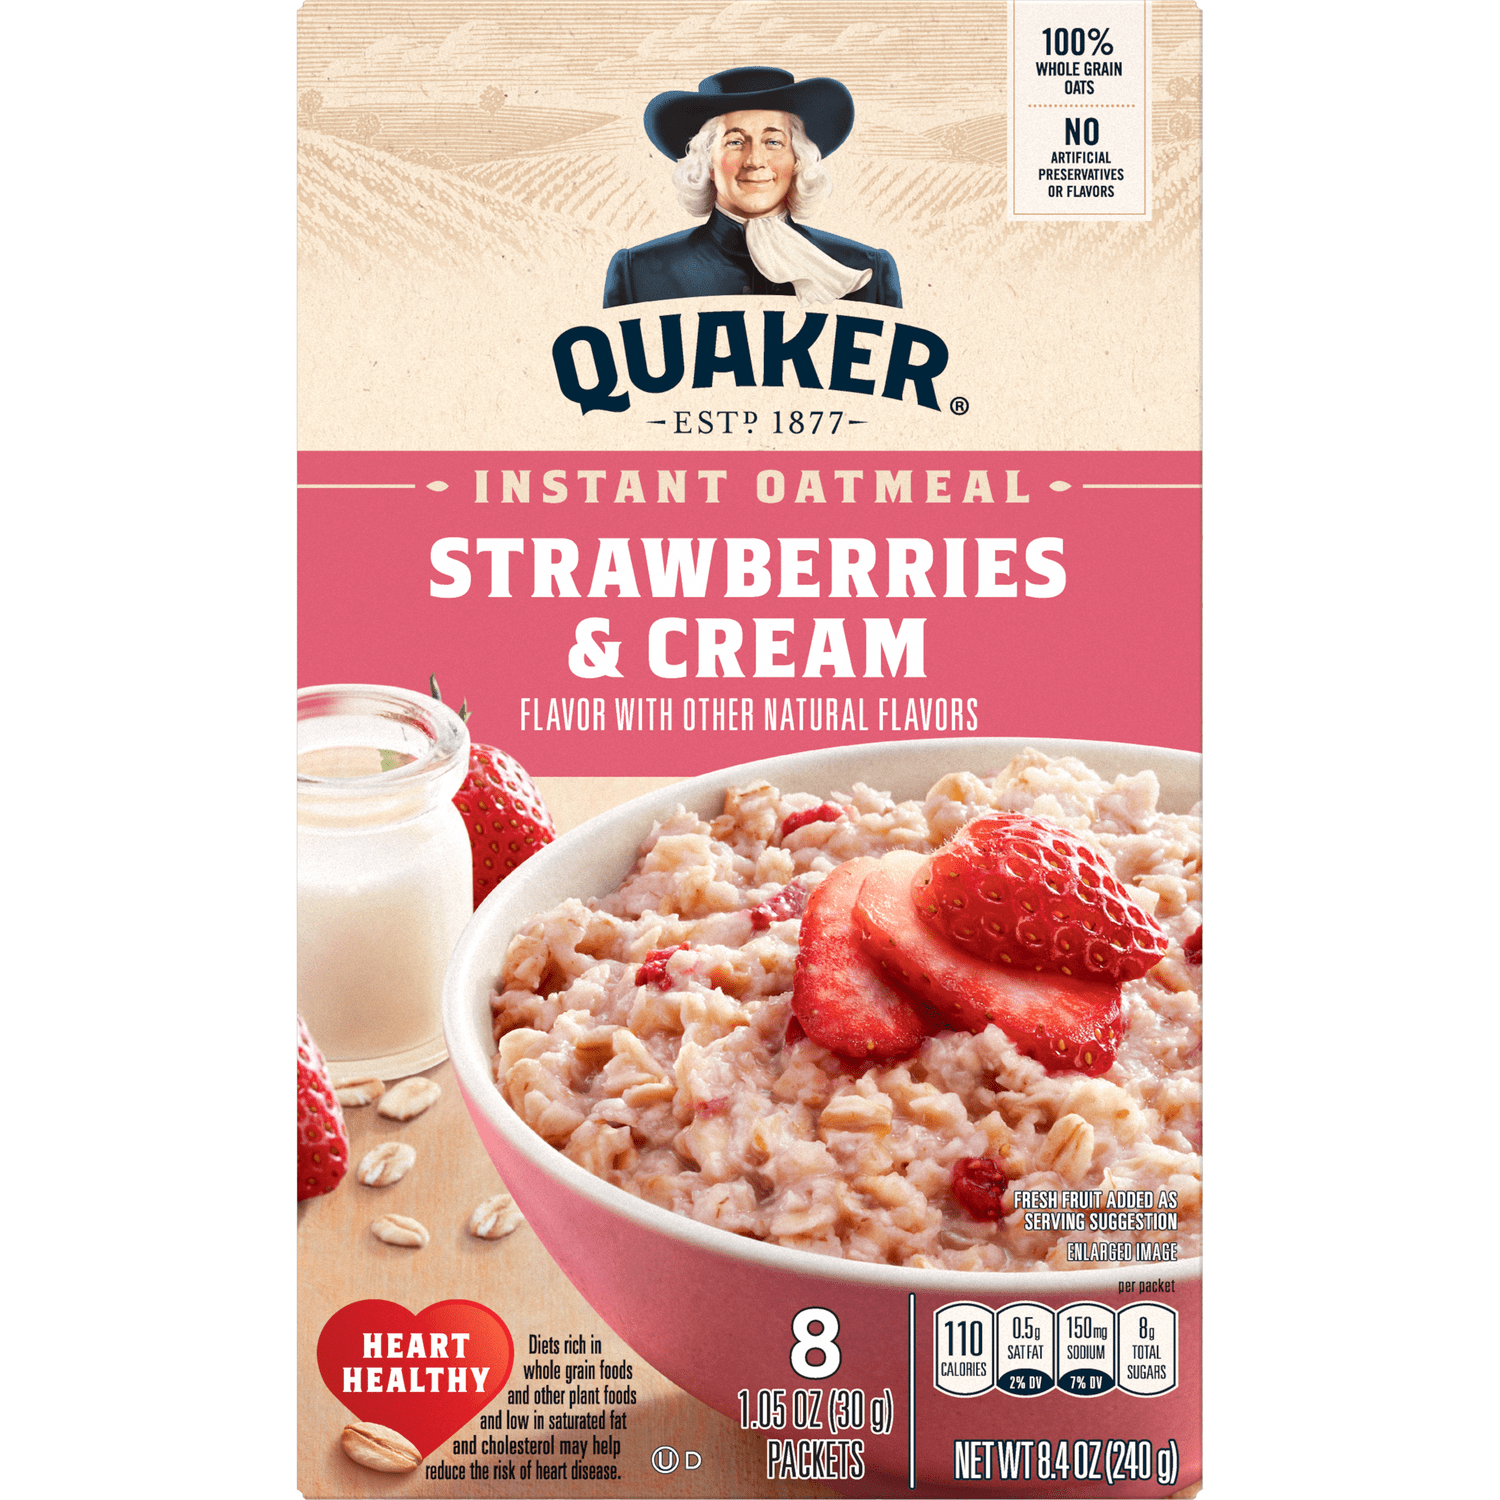 Quaker® Instant Oatmeal - Strawberries and Cream package (front)